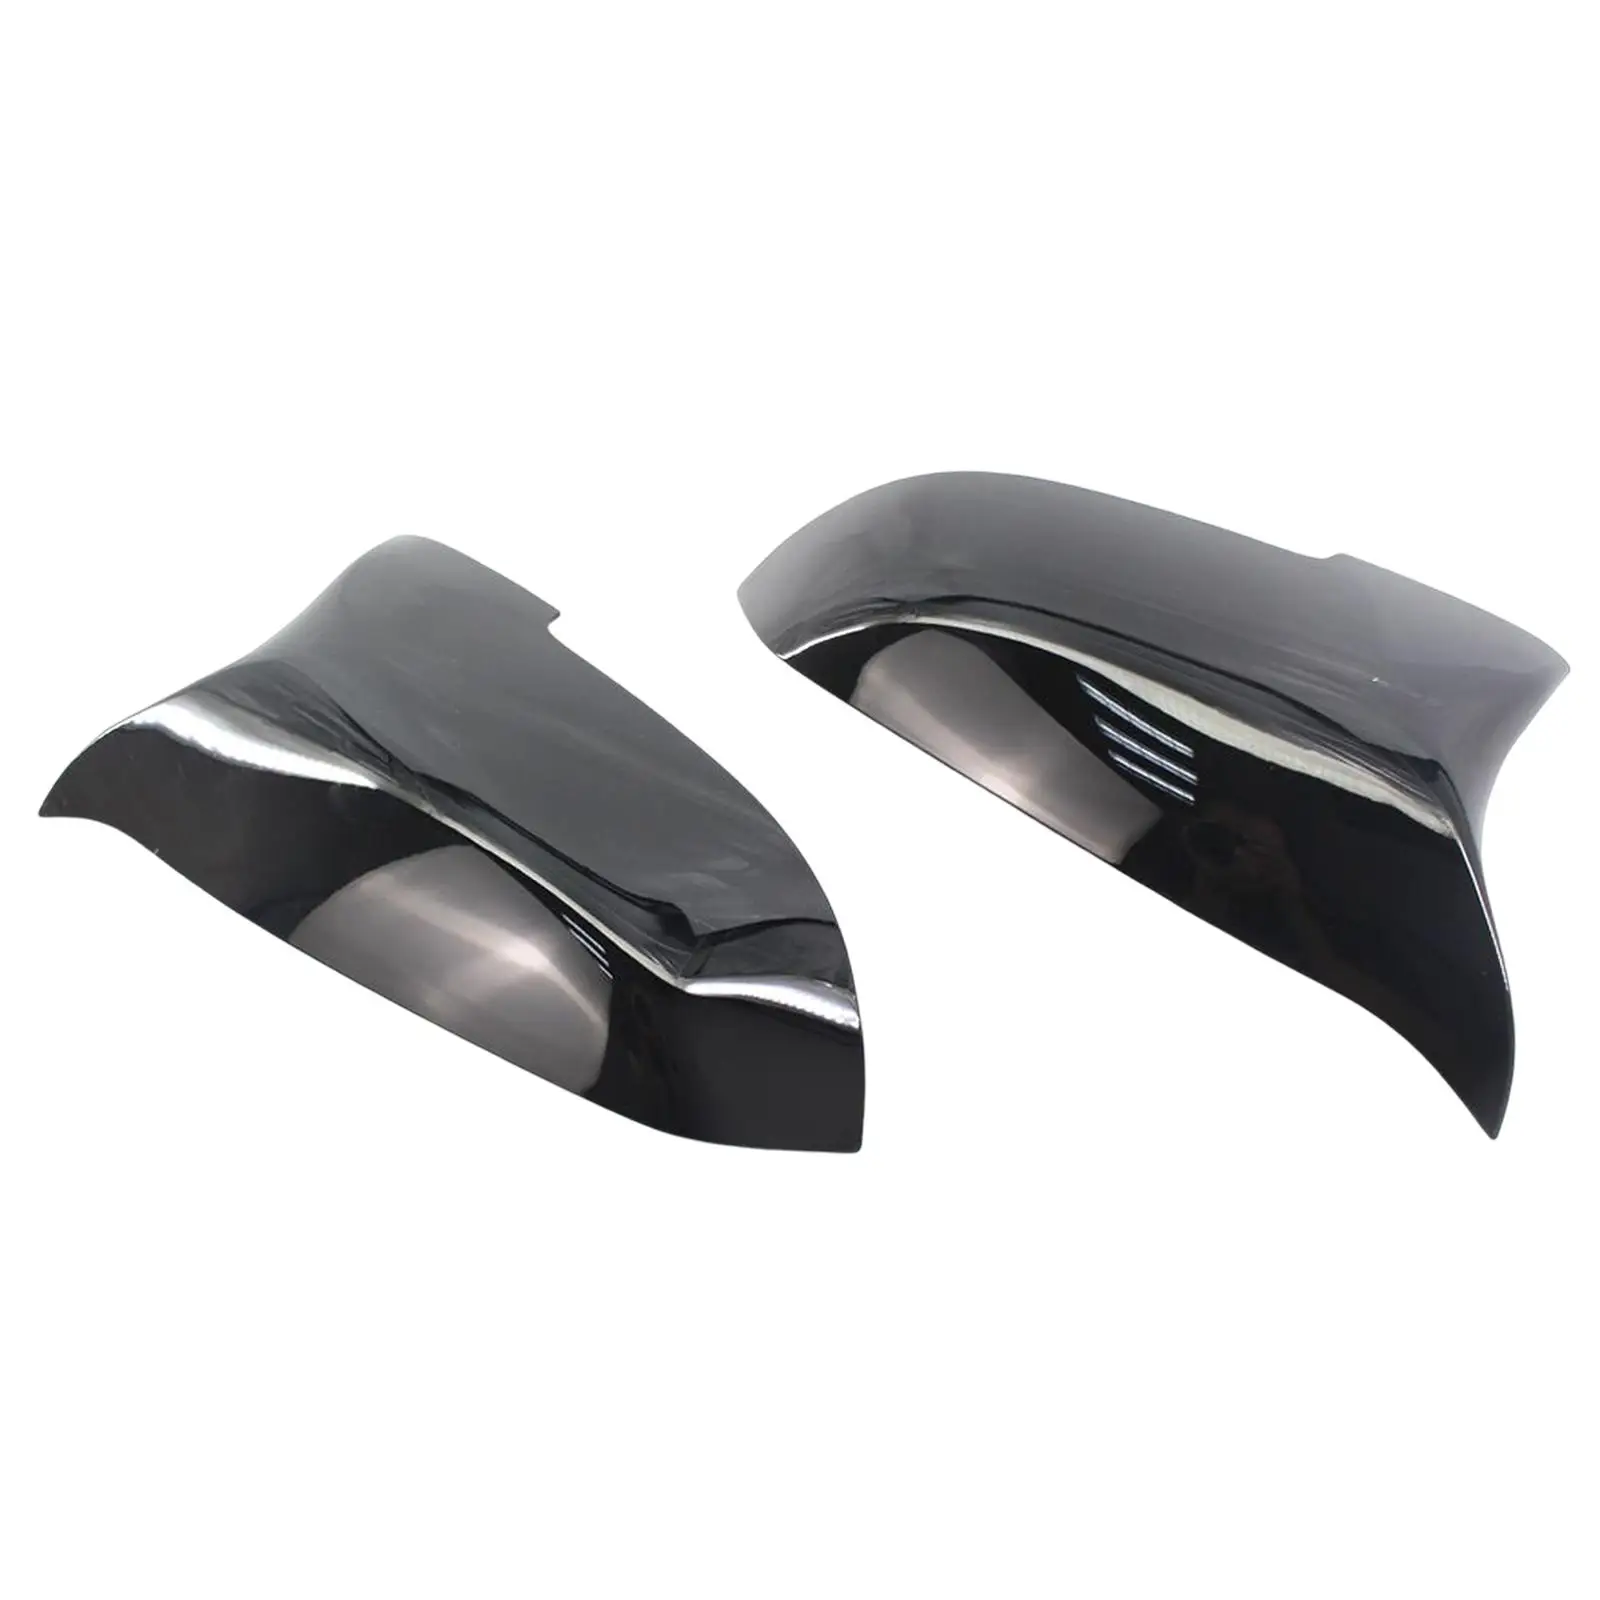 Rear View Side Mirror Caps 51167308683 Side Rear View Mirror Cover Cap for    F12 F13 Spare Parts